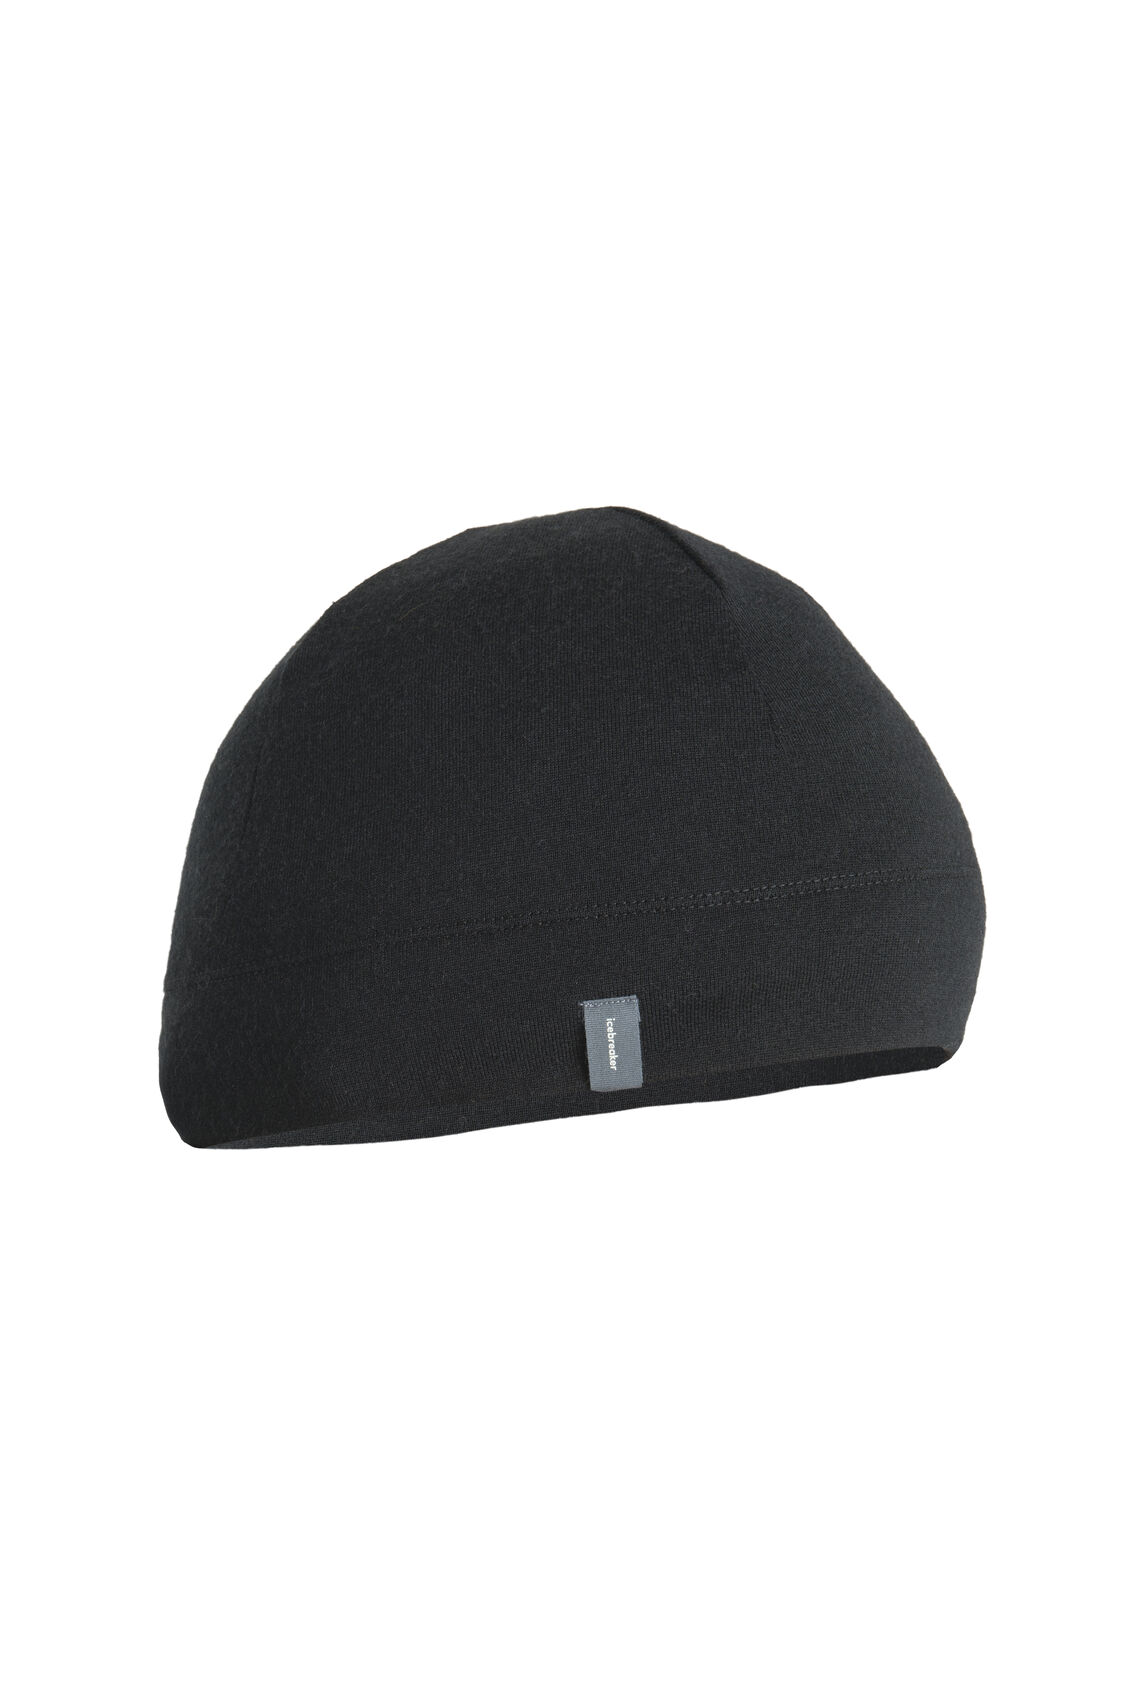 Unisex Merino 260 Ridge Beanie A heavyweight merino wool hat for running, hiking and staying active on the coldest winter days, the 260 Ridge Beanie insulates and breathes whether youre on the move or standing still.